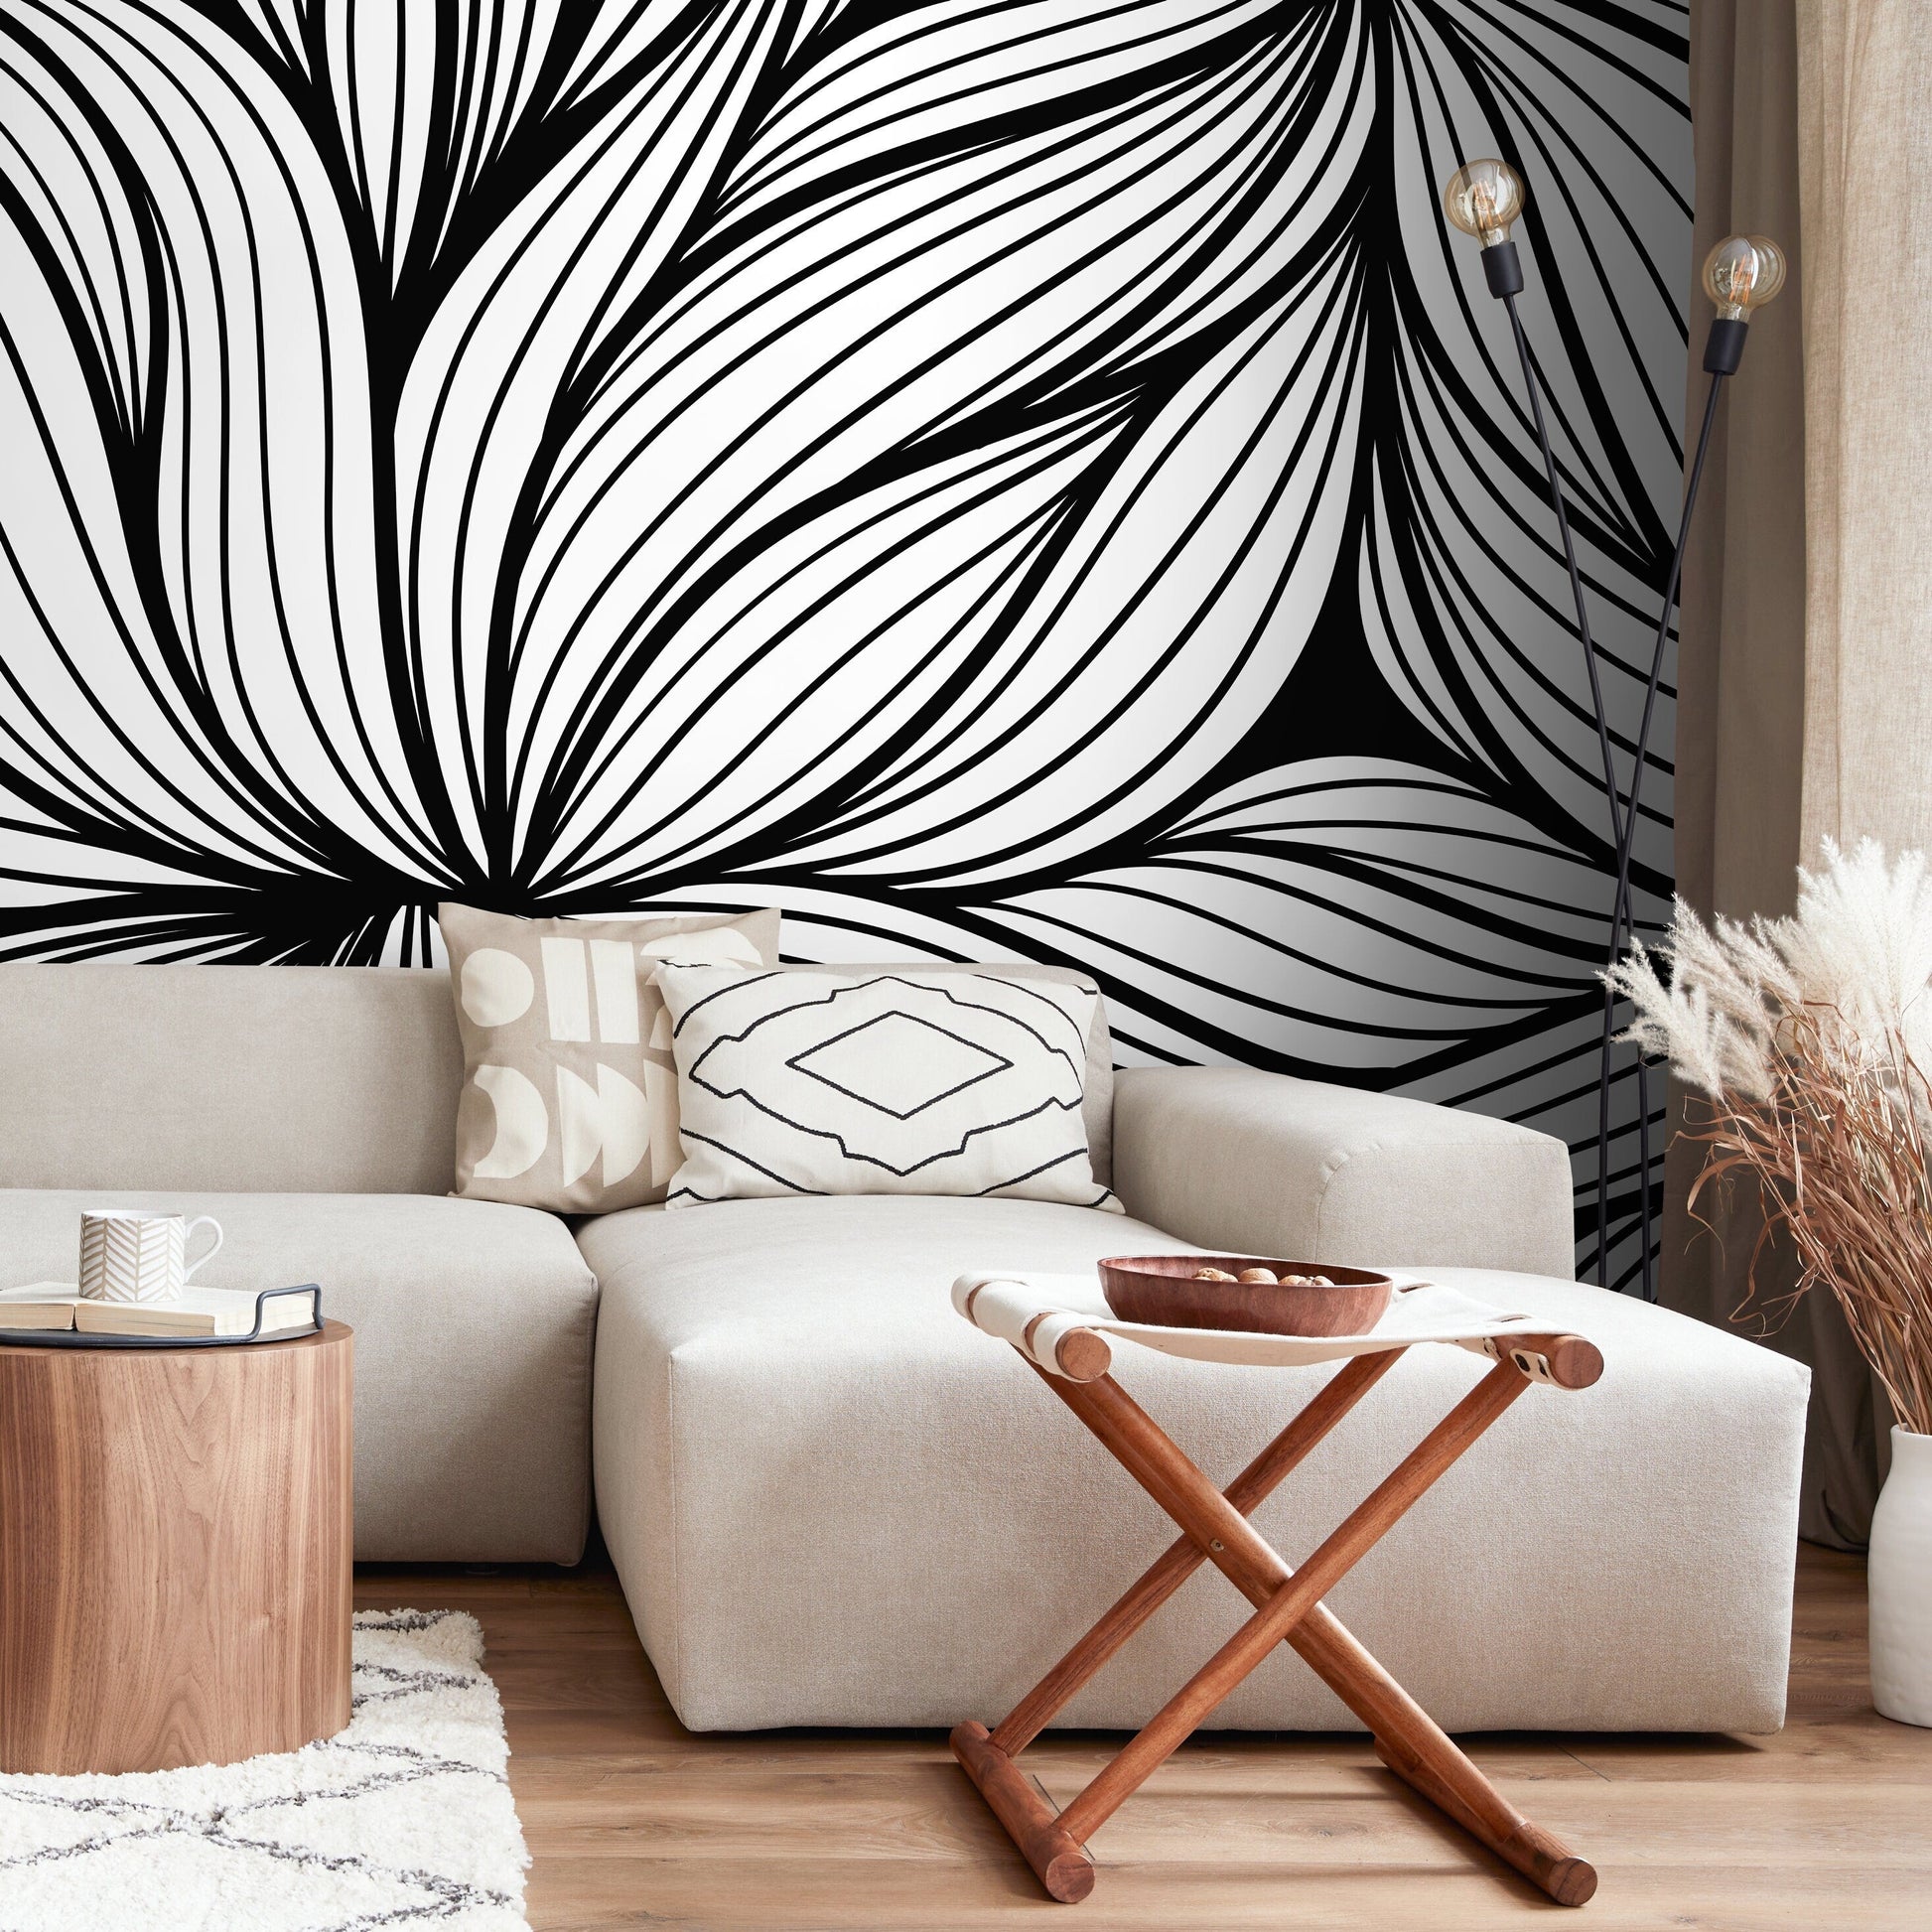 Wallpaper Removable Wallpaper Peel and Stick Wallpaper Wall Decor Home Decor Wall Art Room Decor / Black and White Abstract Wallpaper - B853